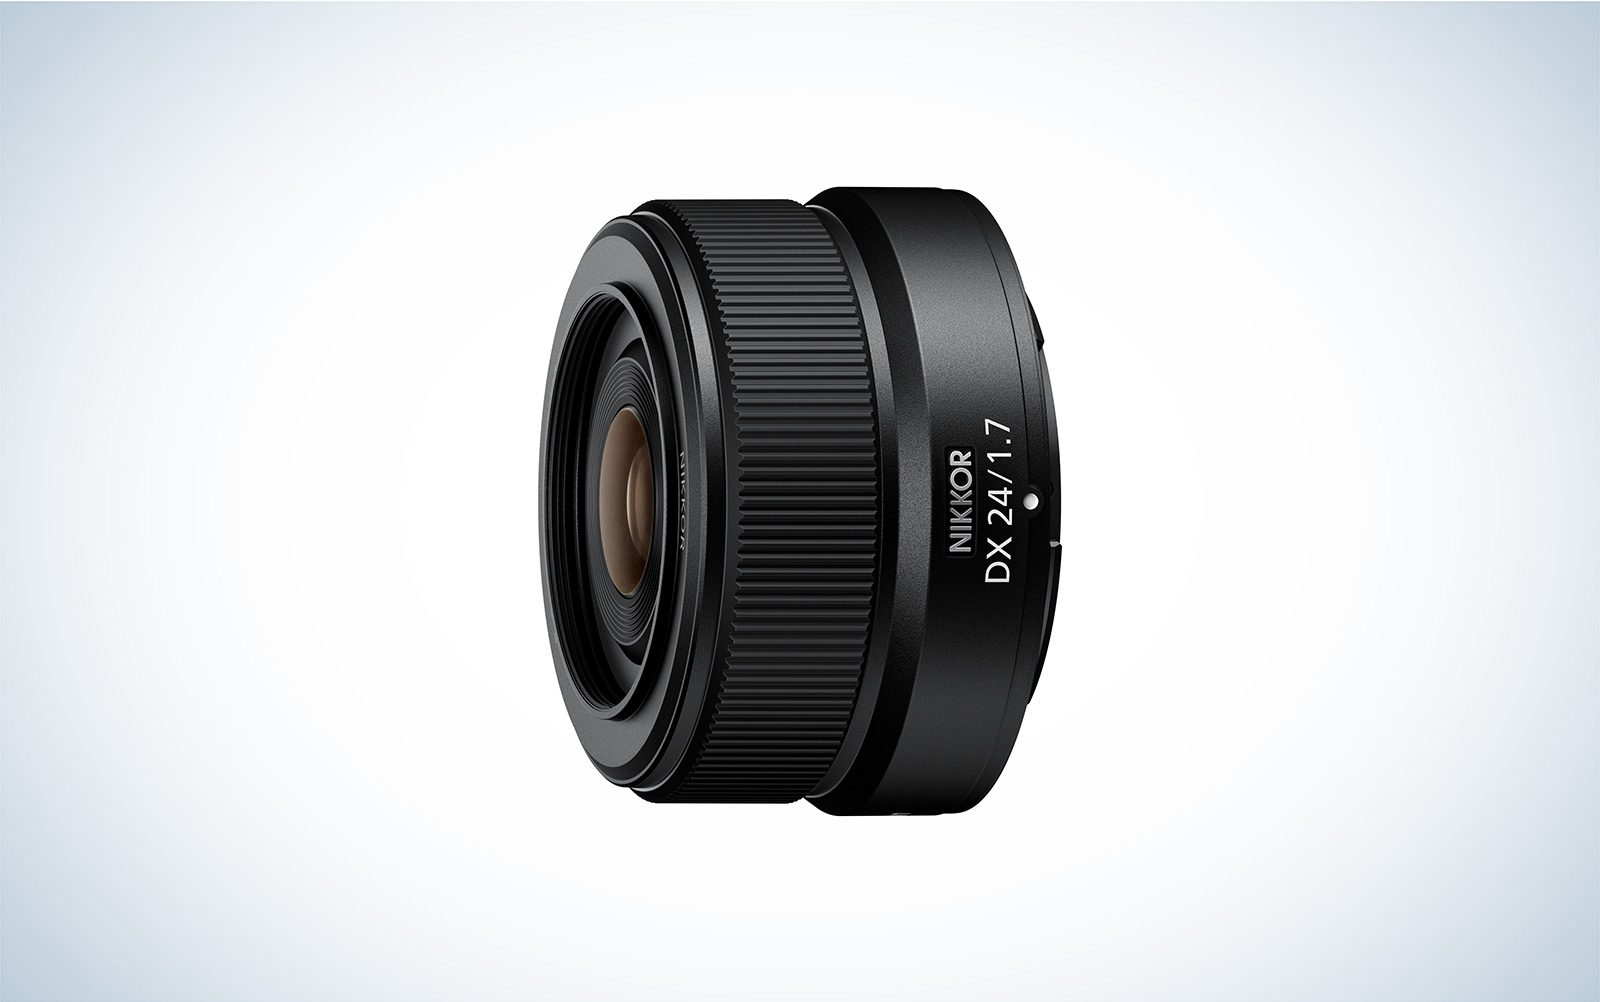 The Nikon Z DX 24mm f/1.7 is a fast wide-angle lens for APS-C 